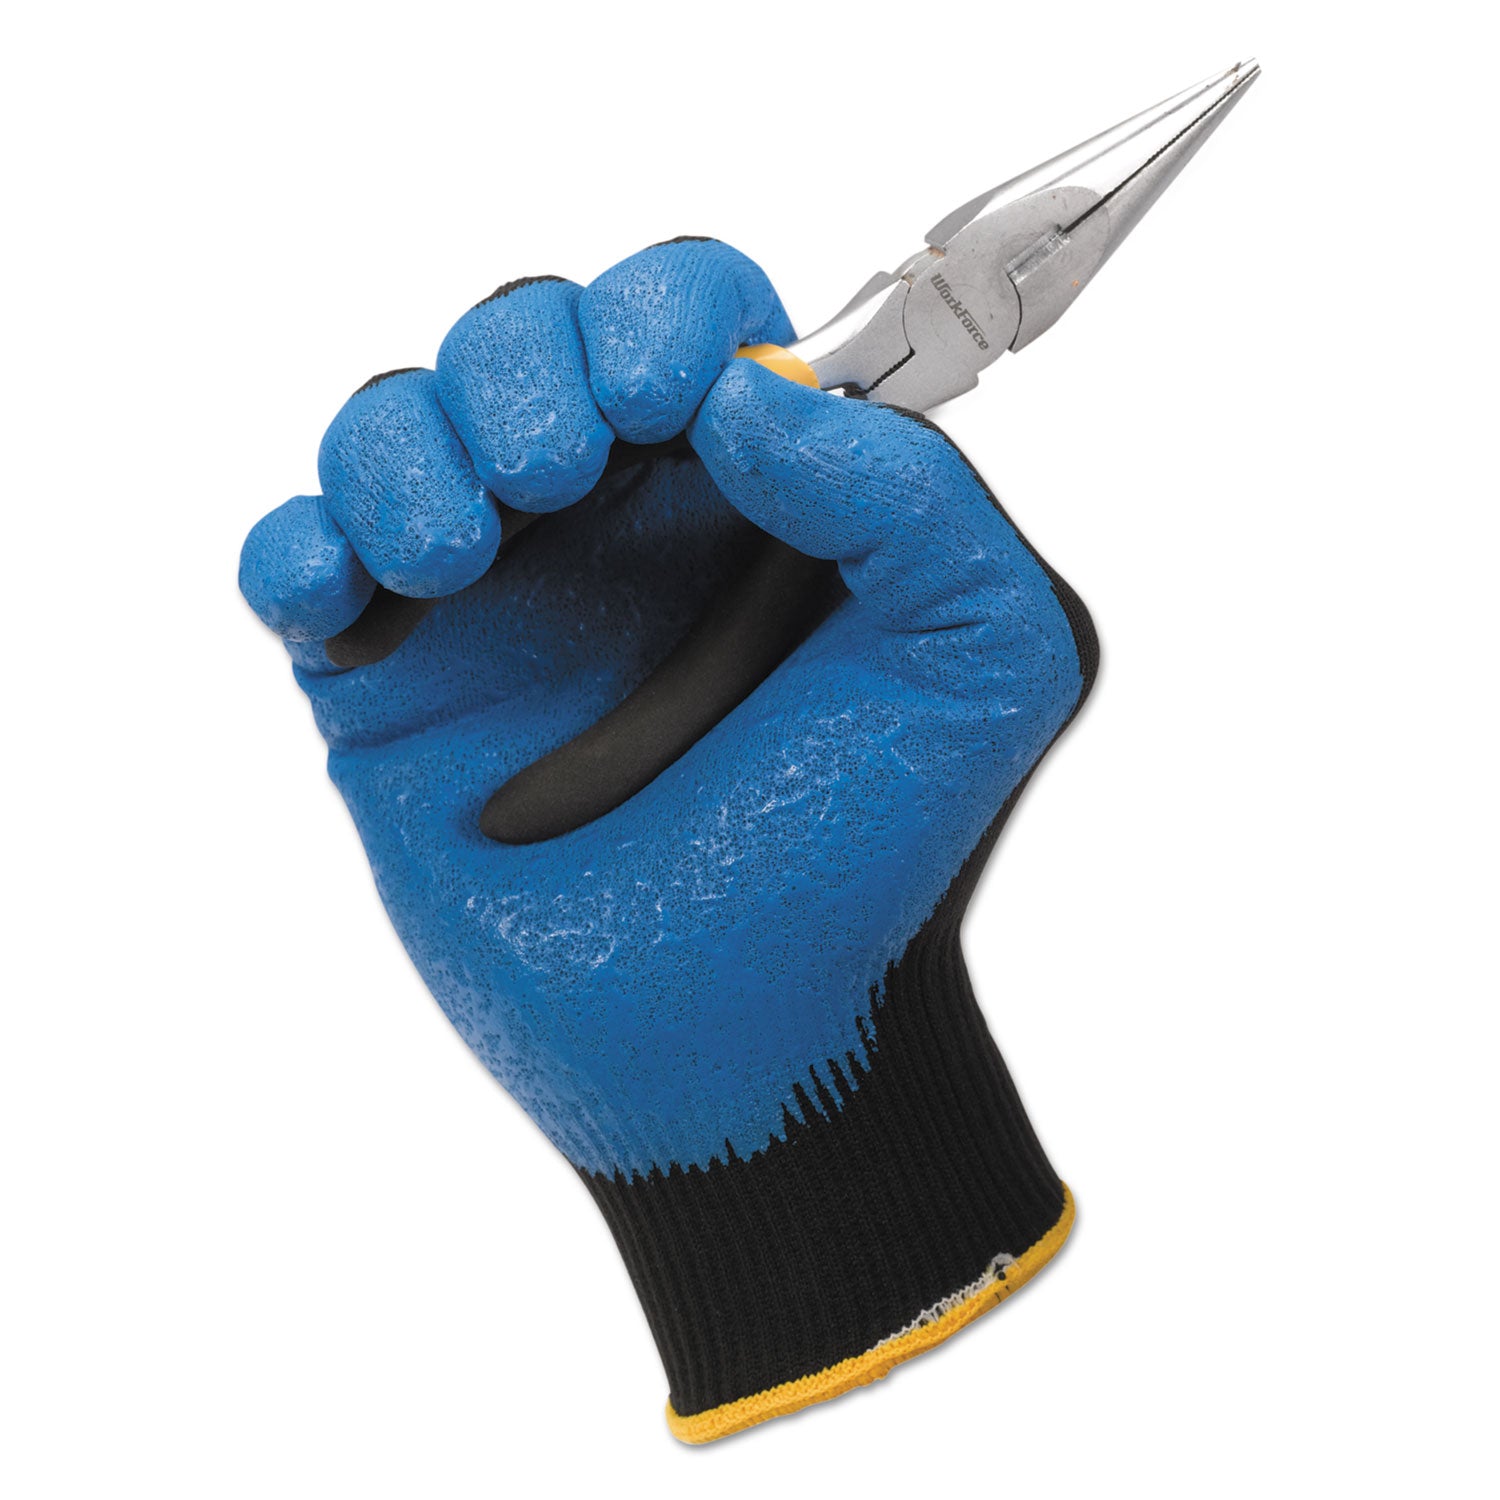 g40-foam-nitrile-coated-gloves-250-mm-length-x-large-size-10-blue-12-pairs_kcc40228 - 4